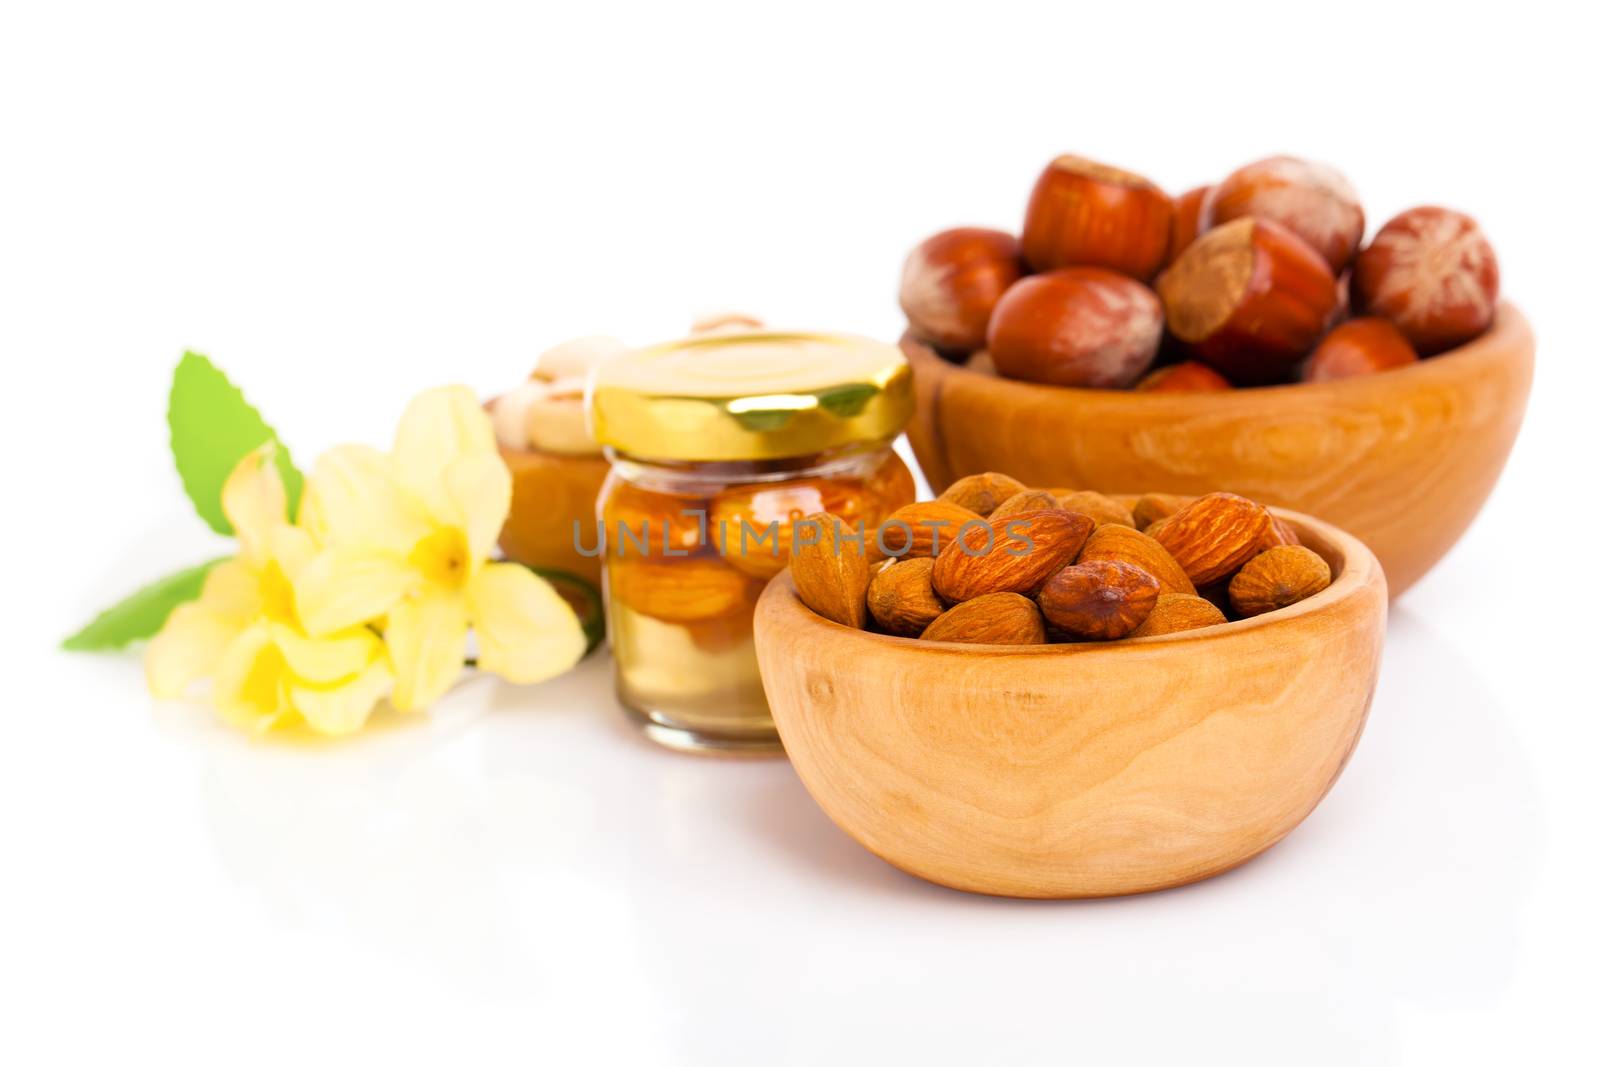 Hazelnuts in a wooden bowl on white background by motorolka